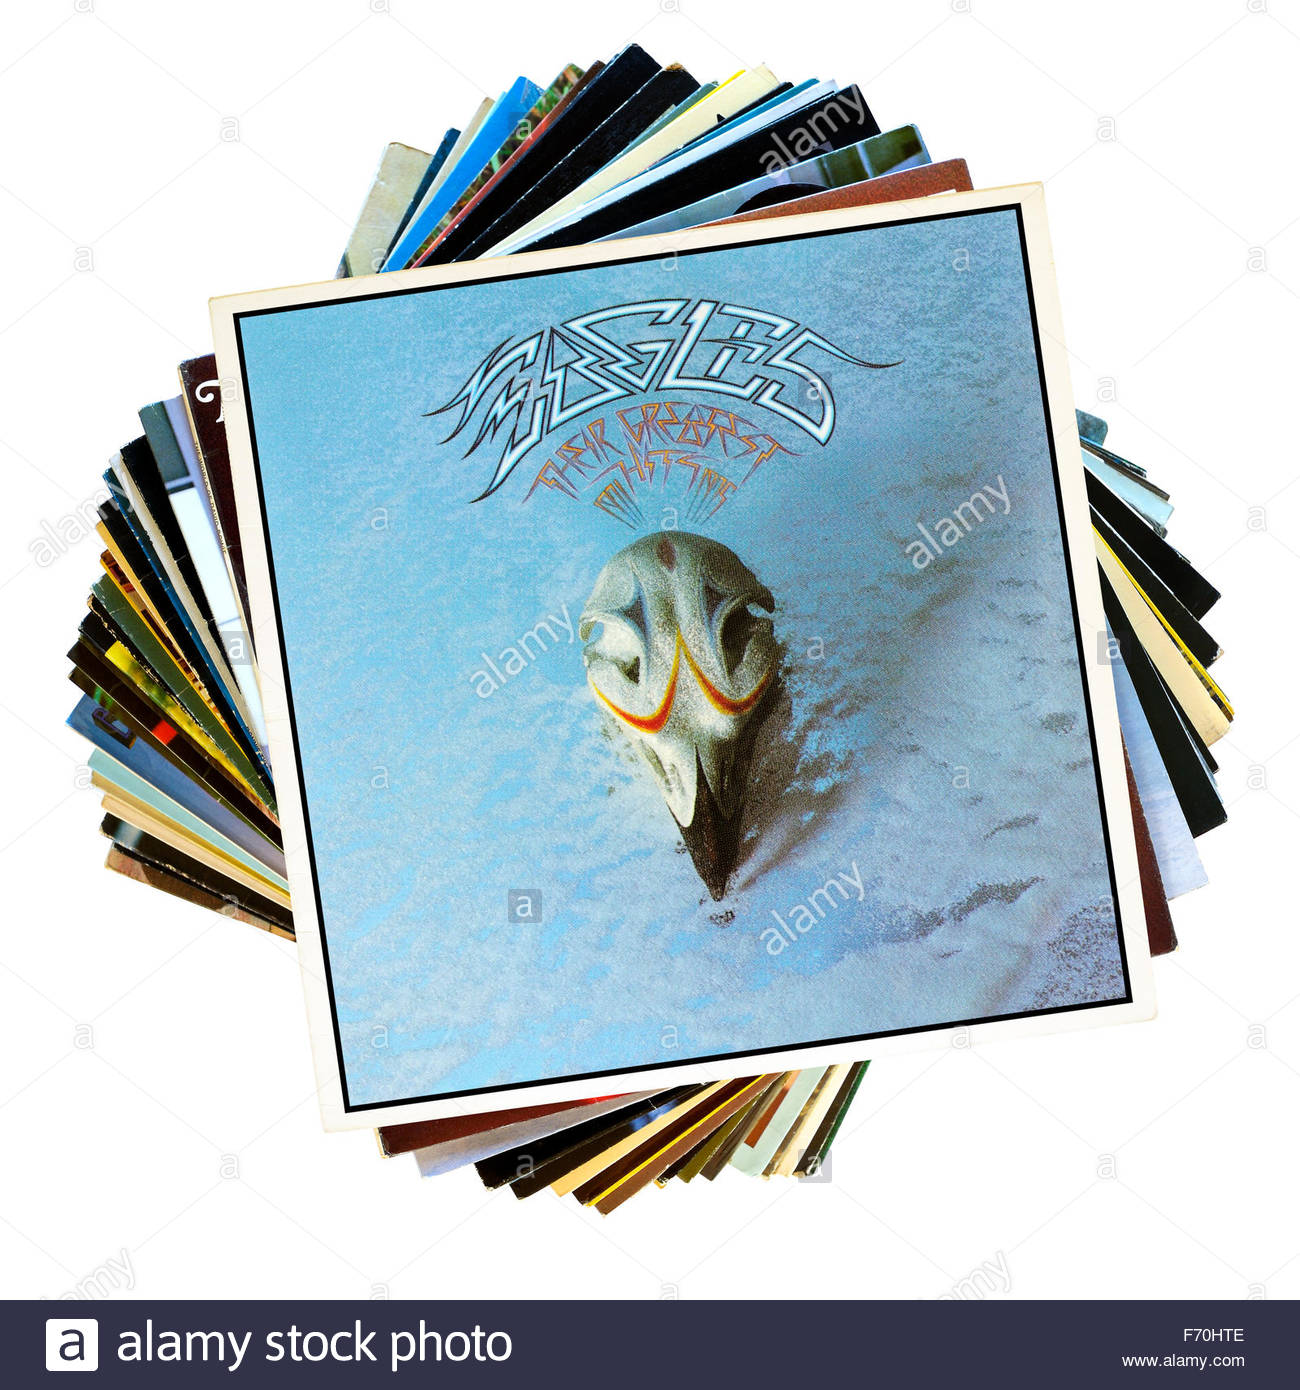 Eagles 1976 Album Their Greatest Hits Stack Of Lp Records England Stock Photo Alamy